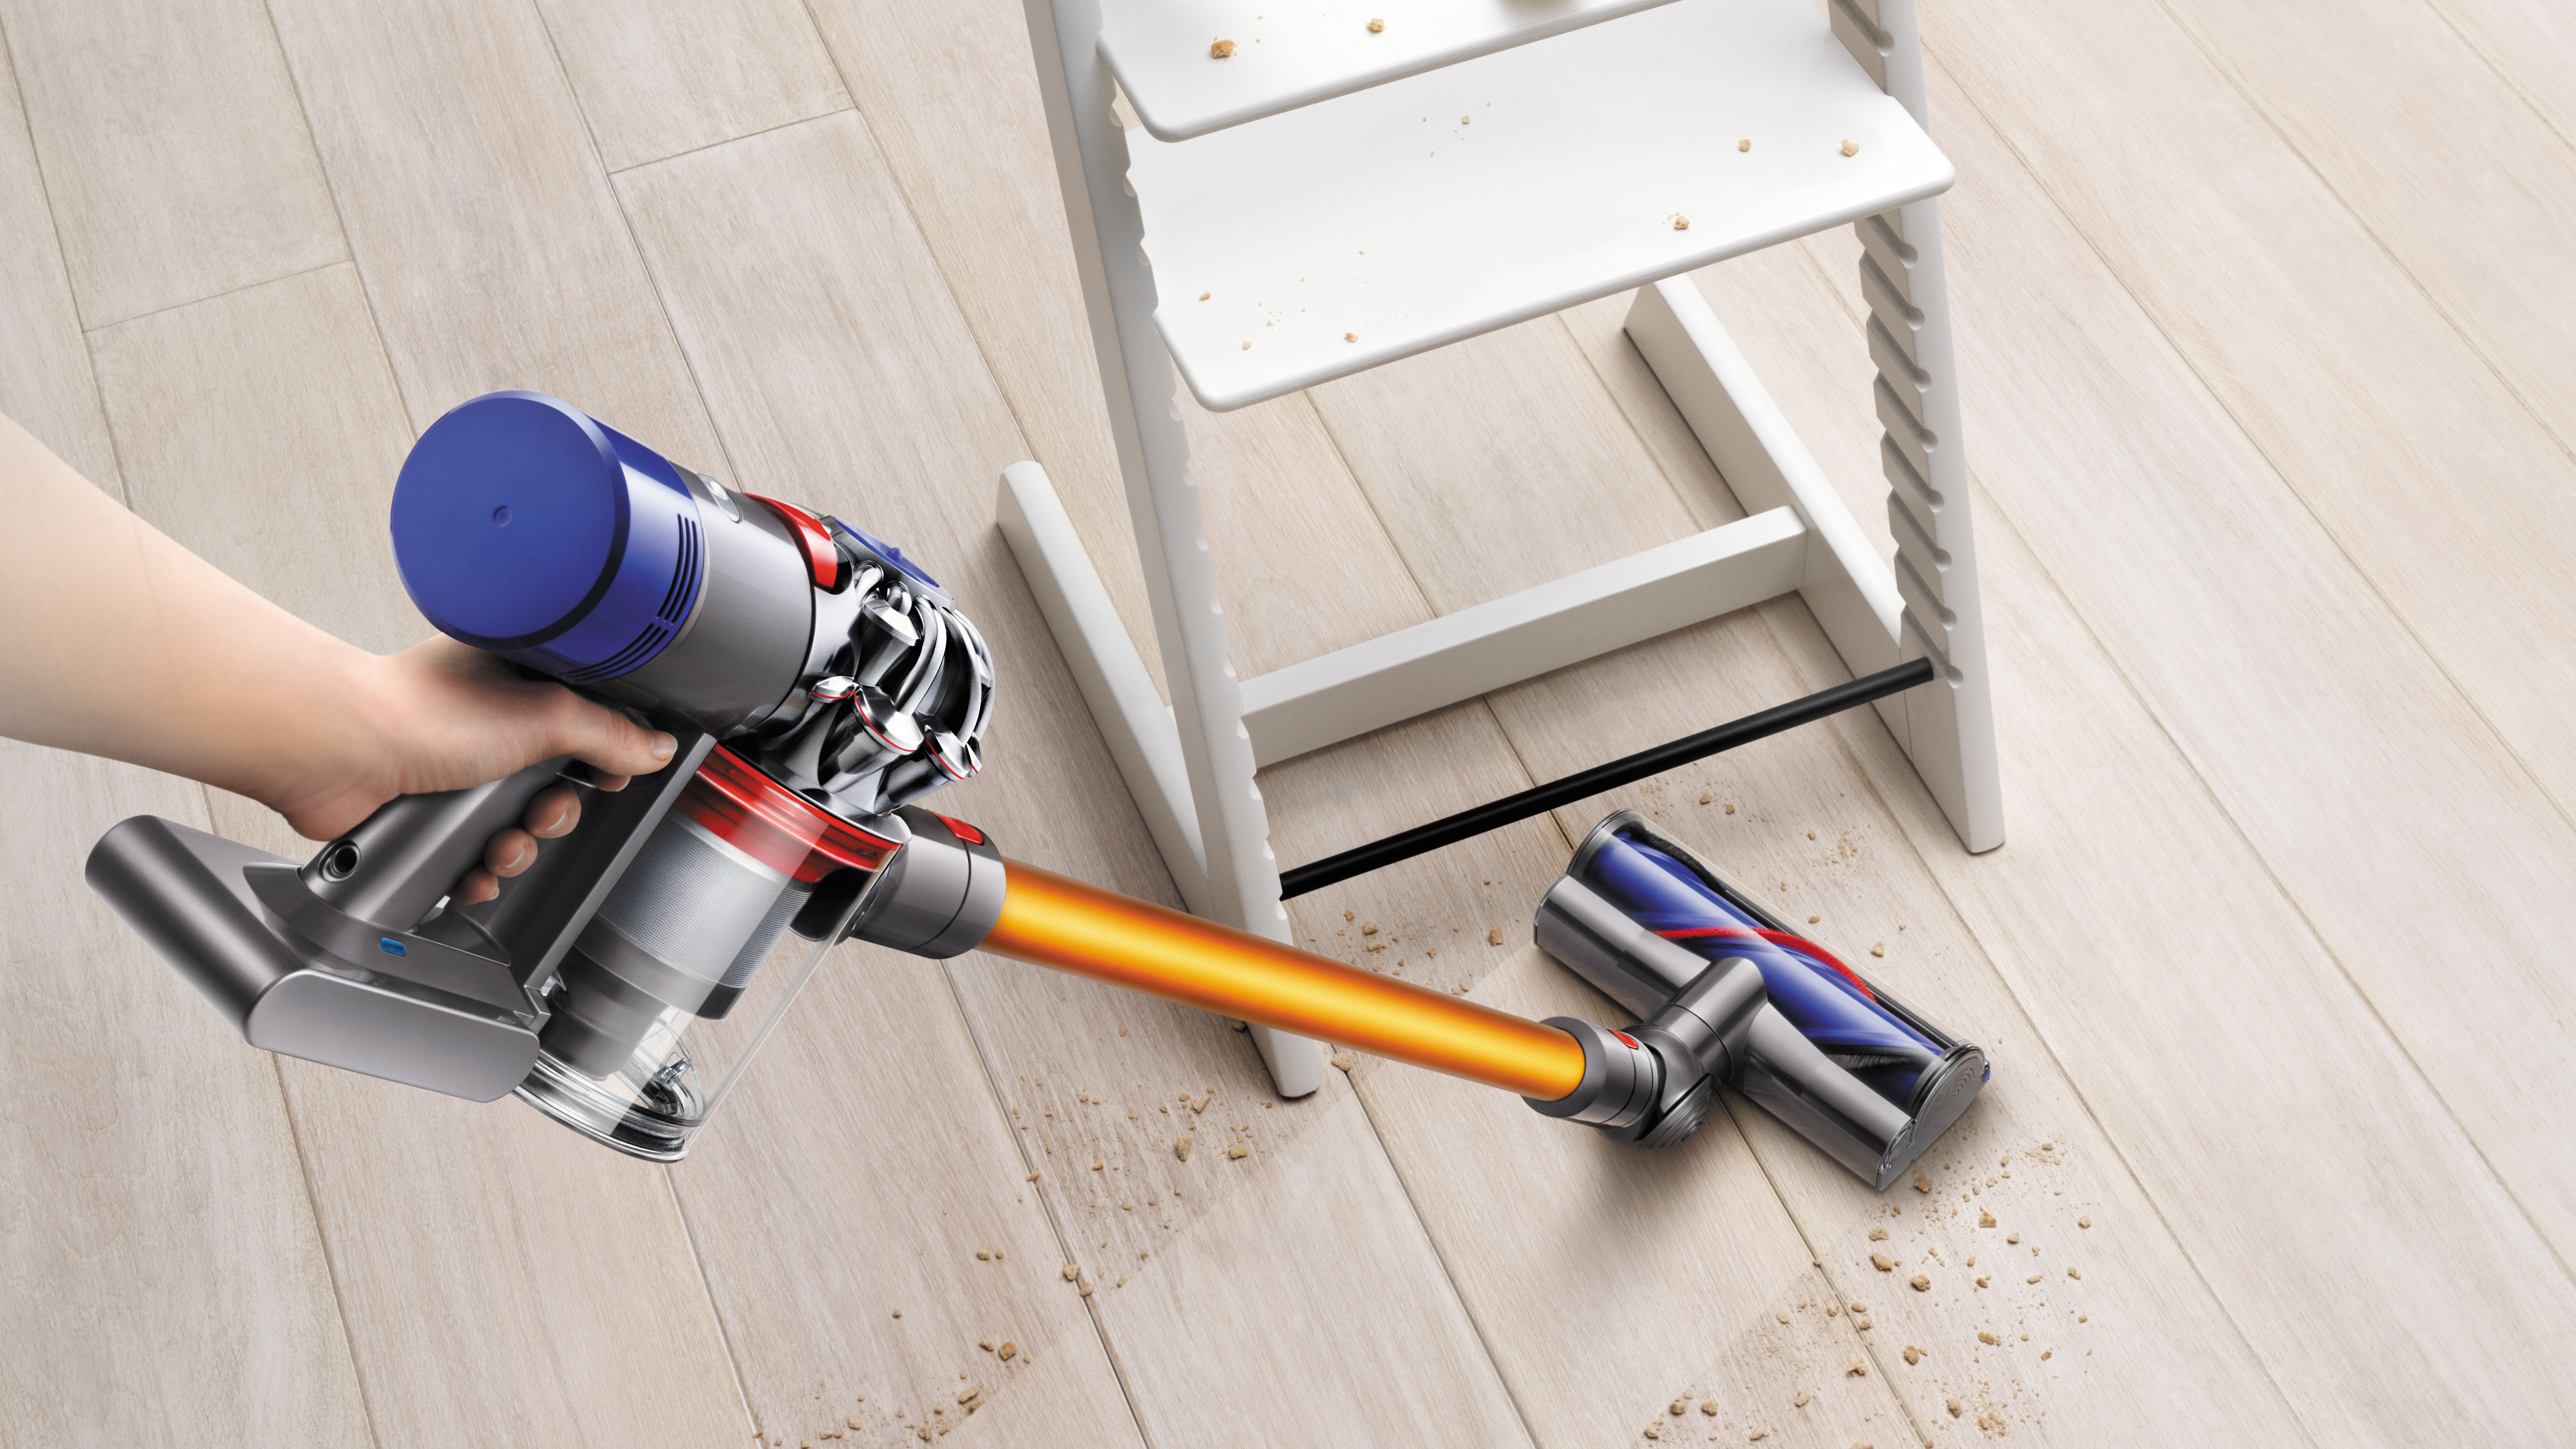 16 Recommended Best Vacuums for Hardwood Floors 2016 2024 free download best vacuums for hardwood floors 2016 of dyson doubles the battery life of its cordless vacuums with the v8 intended for dyson doubles the battery life of its cordless vacuums with the v8 ab